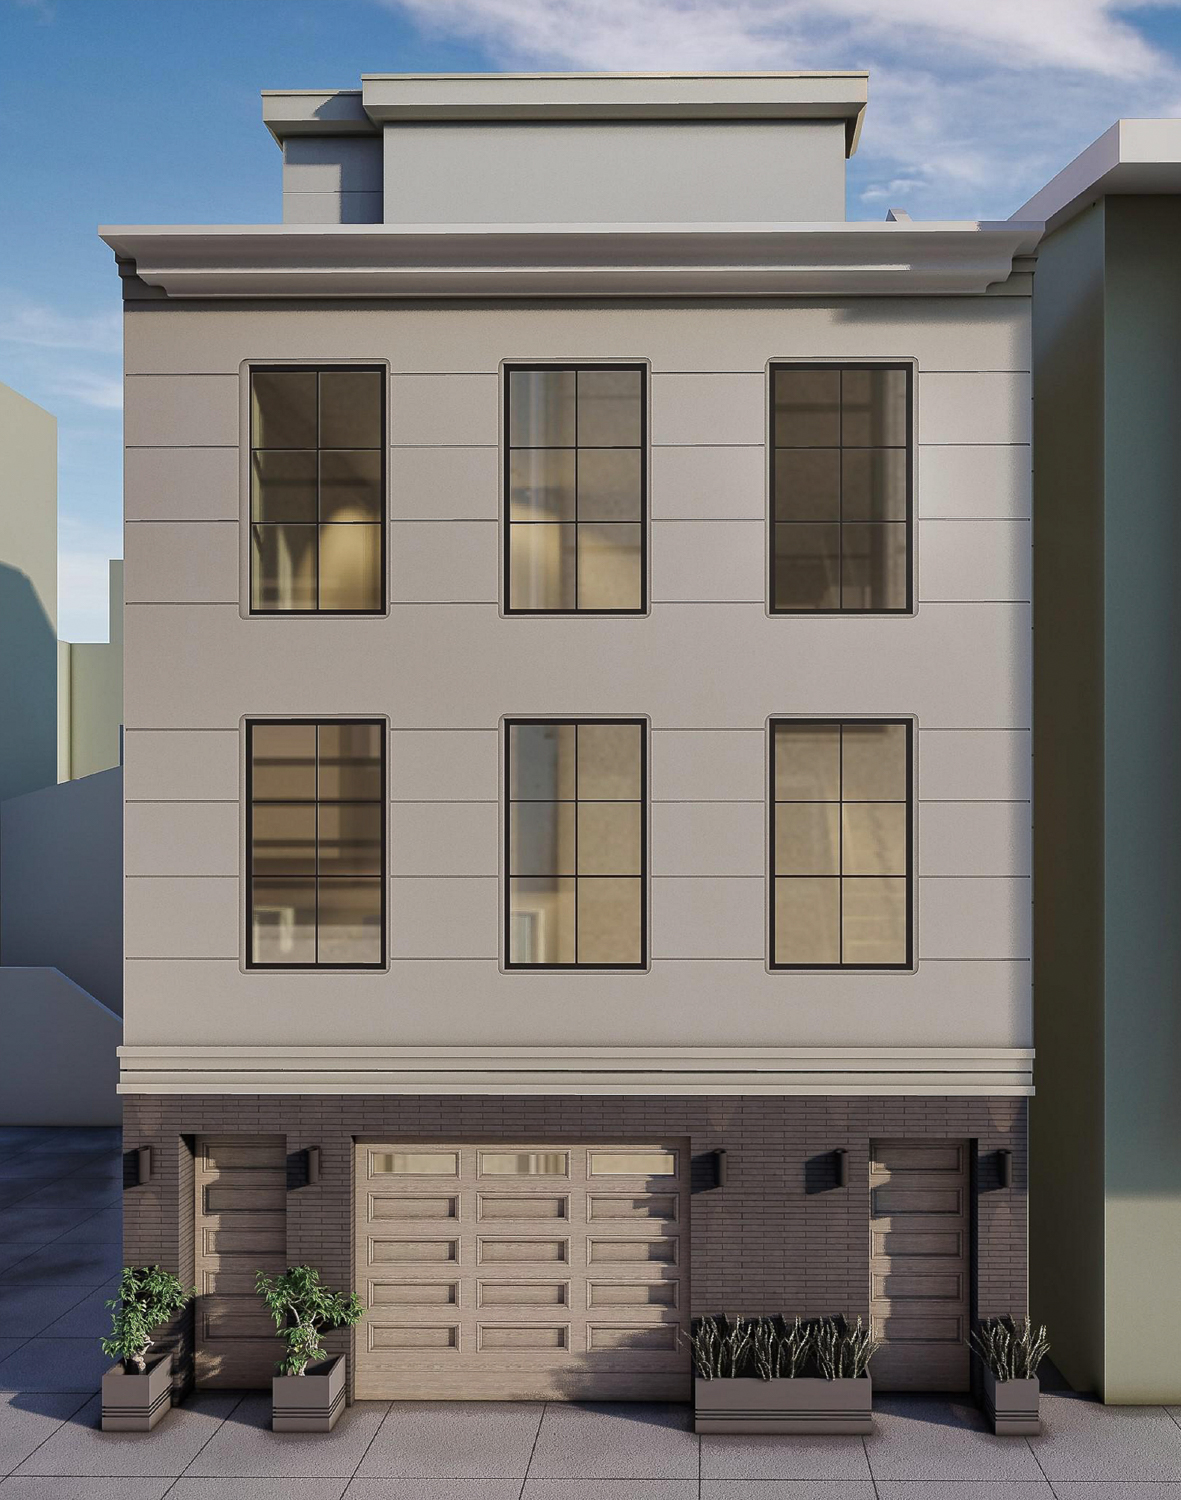 2536 California Street along Perine Place, rendering by EAG Studio